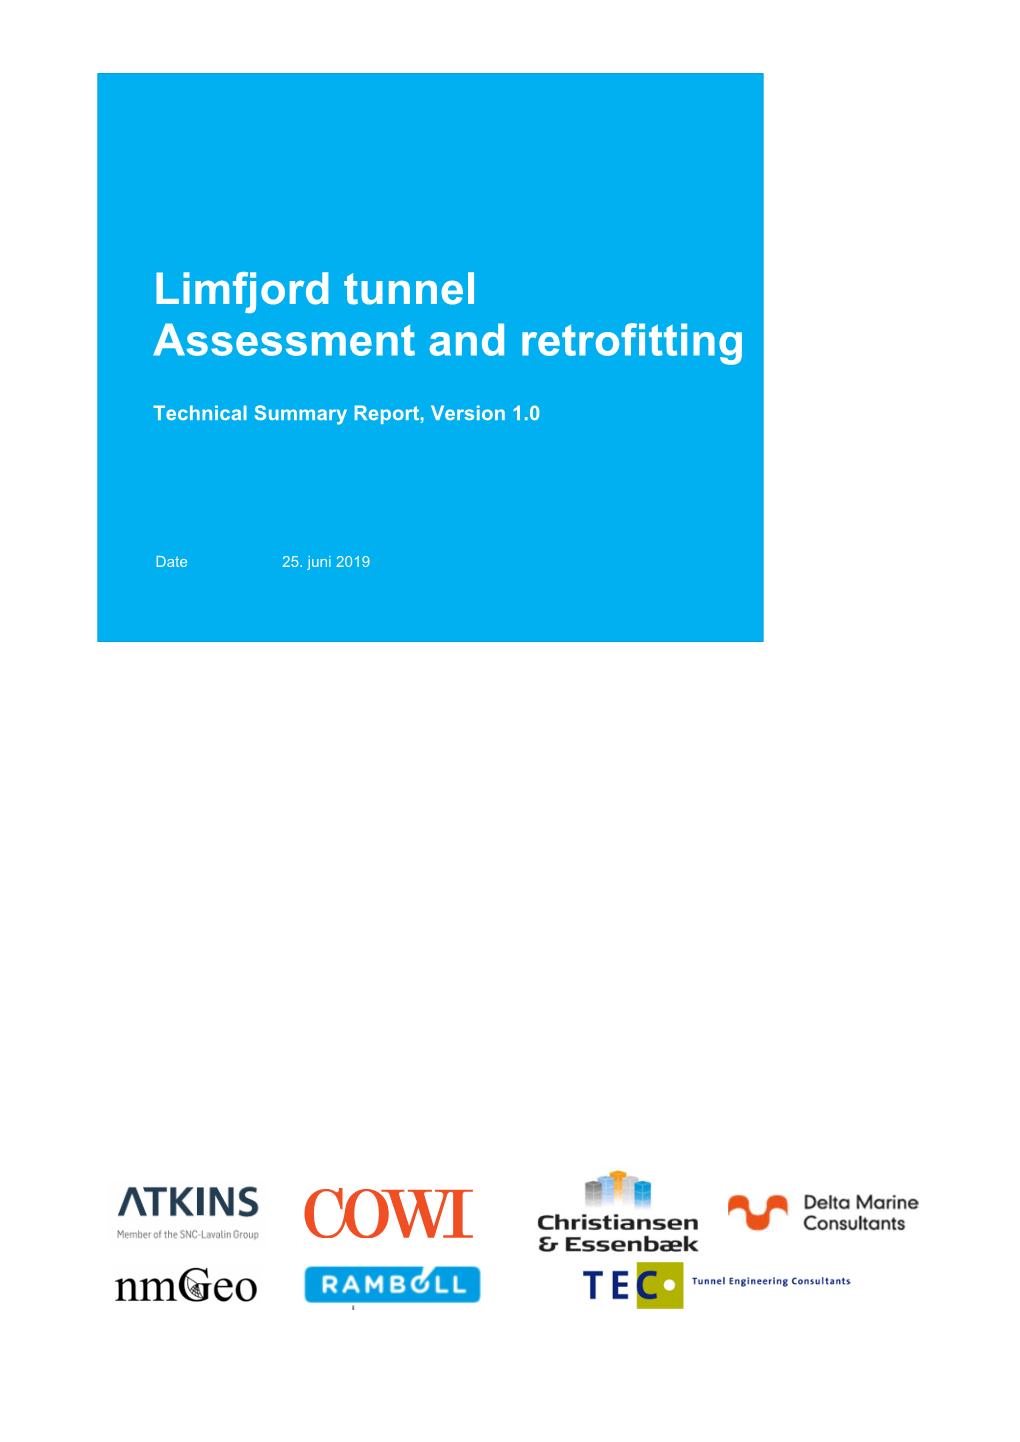 Limfjord Tunnel Assessment and Retrofitting